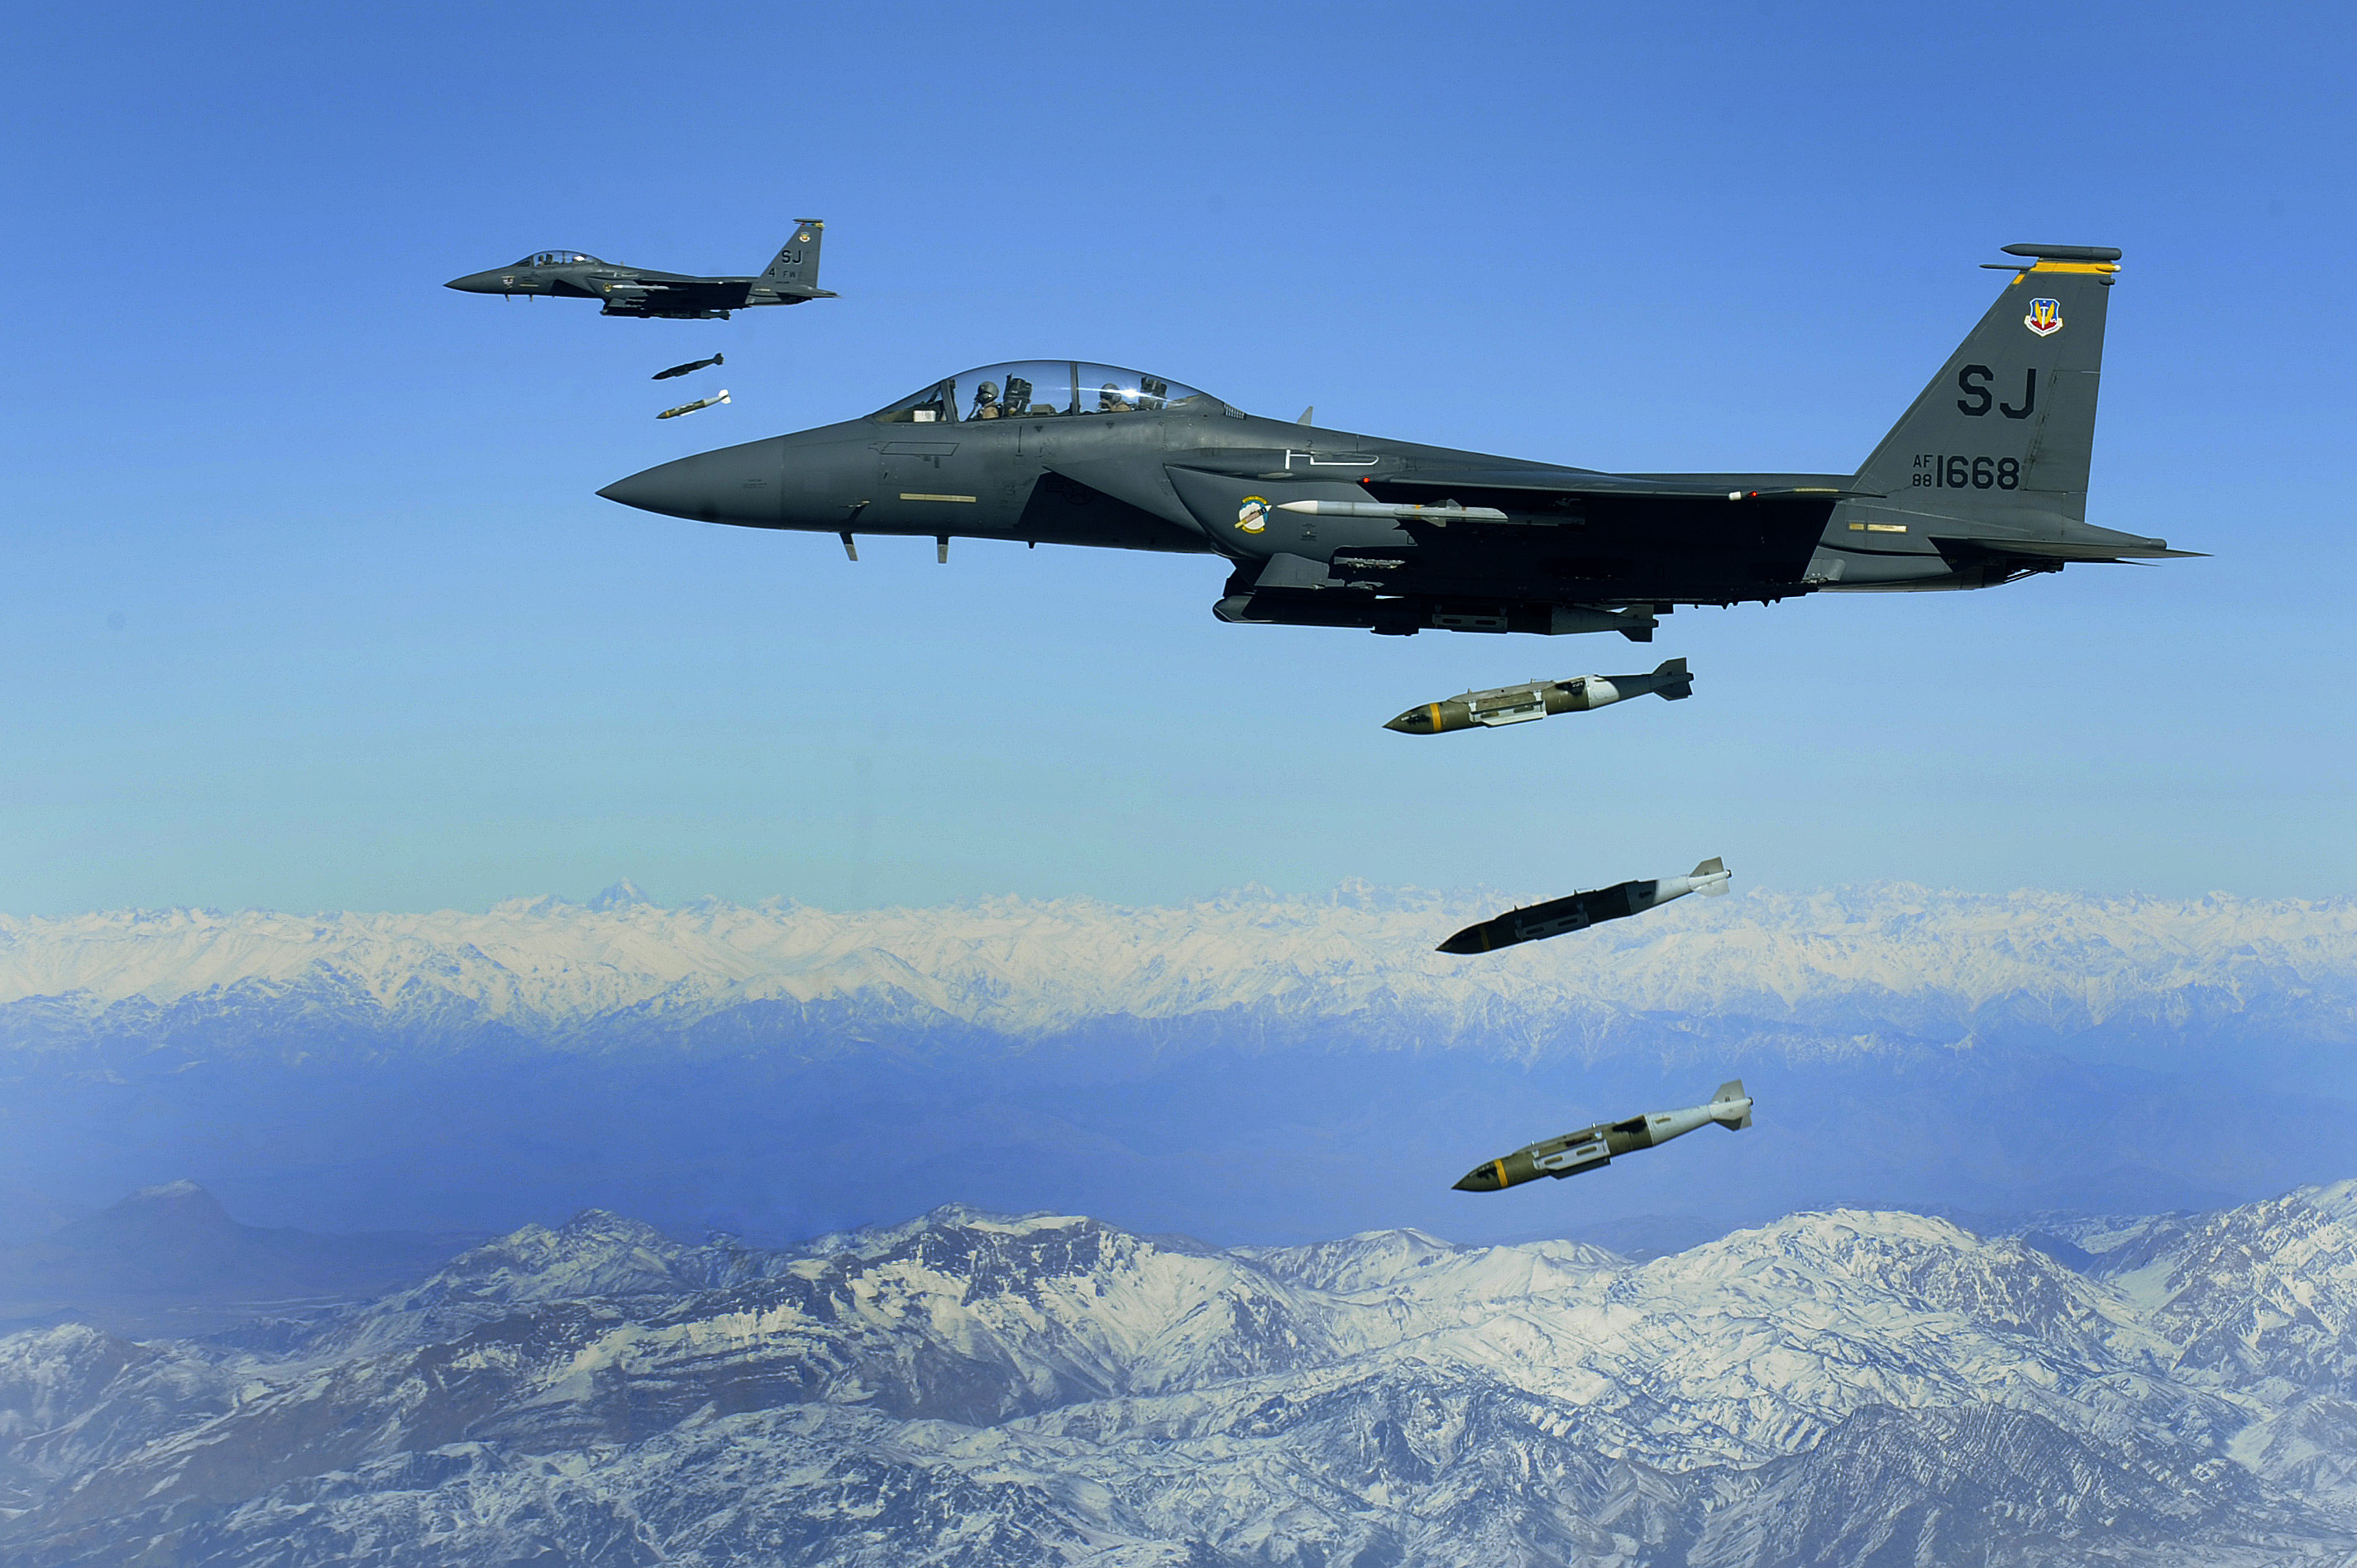 335th_Fighter_Squadron_F-15E's_drop_JDAM's_on_an_insurgent_cave.jpg